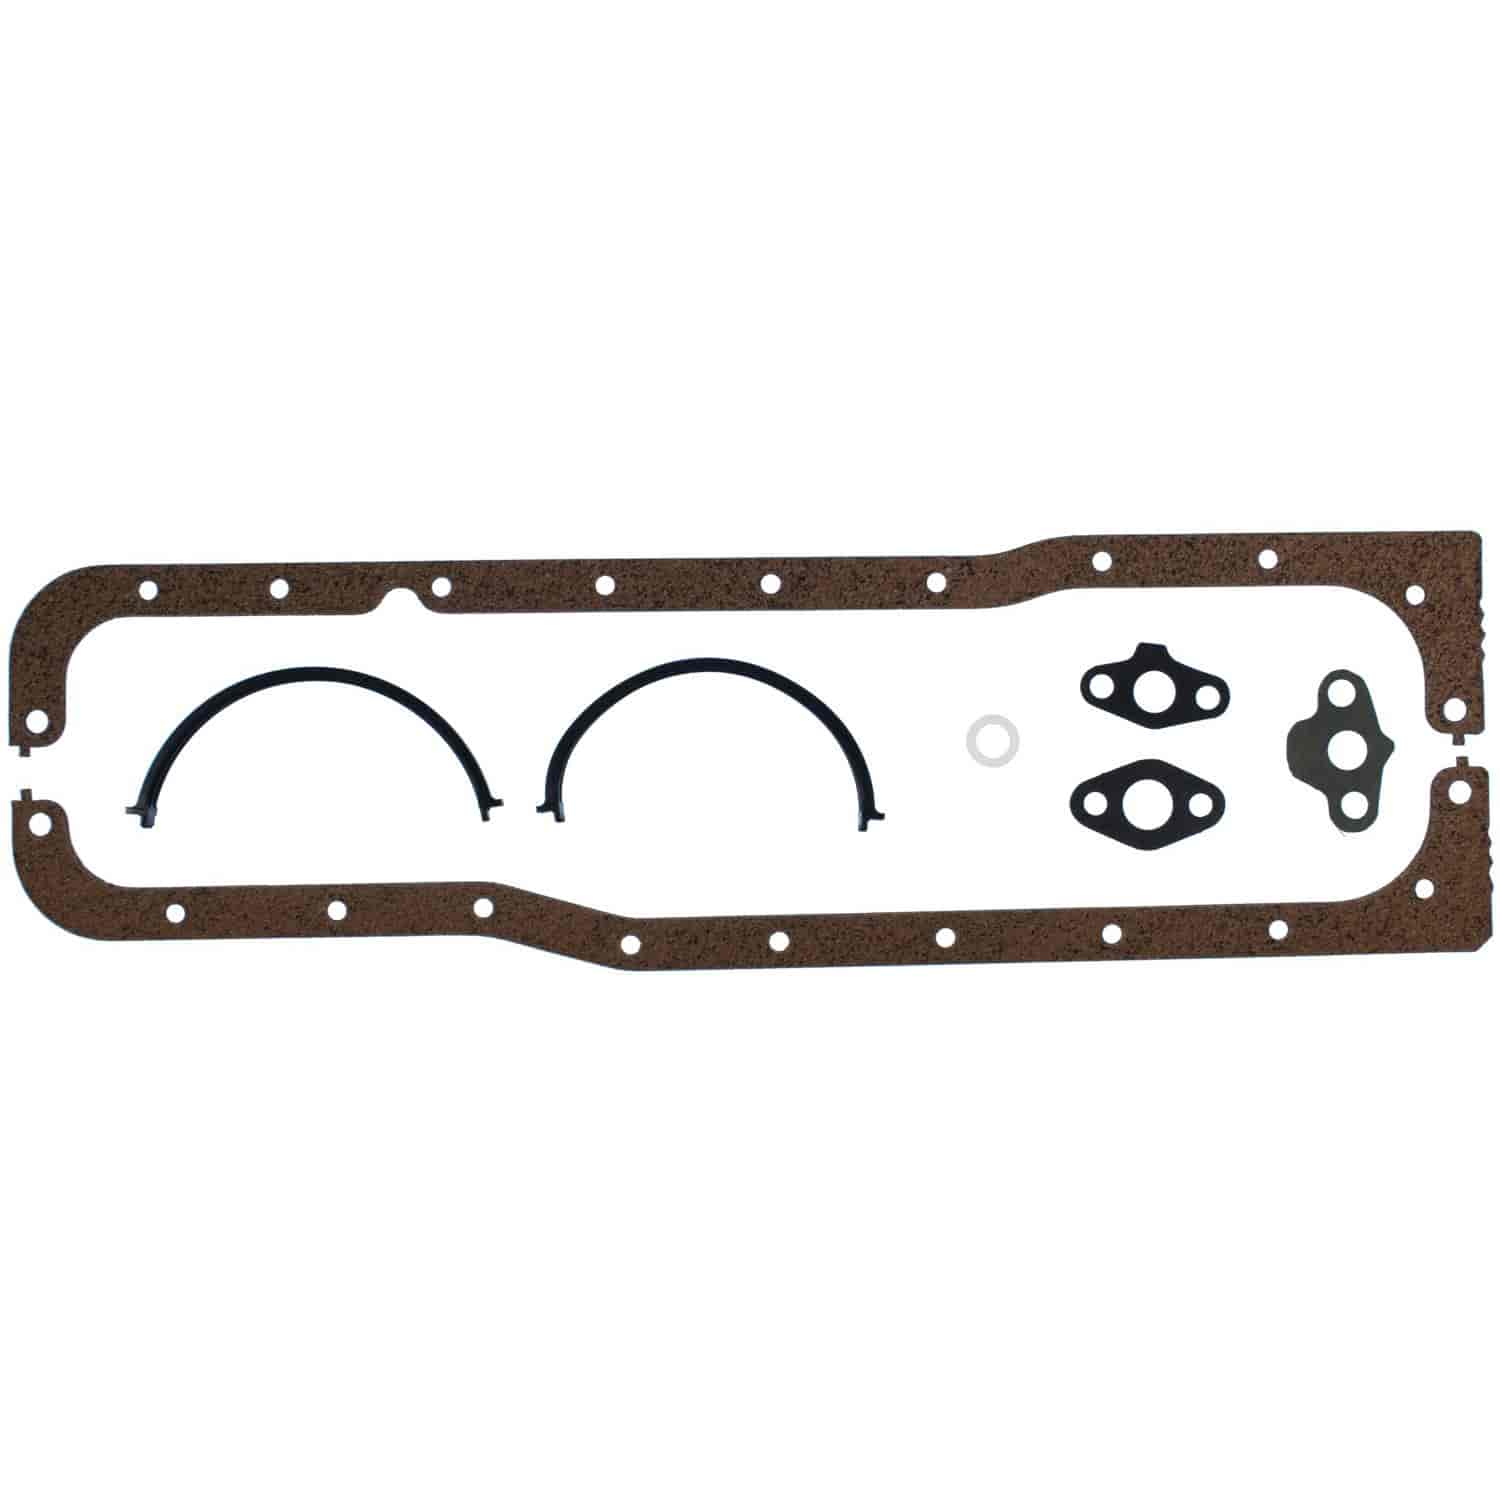 Oil Pan Gasket Set 1962-1995 Small Block Ford 221/255/260/289/302 in Cork with Metal Carrier